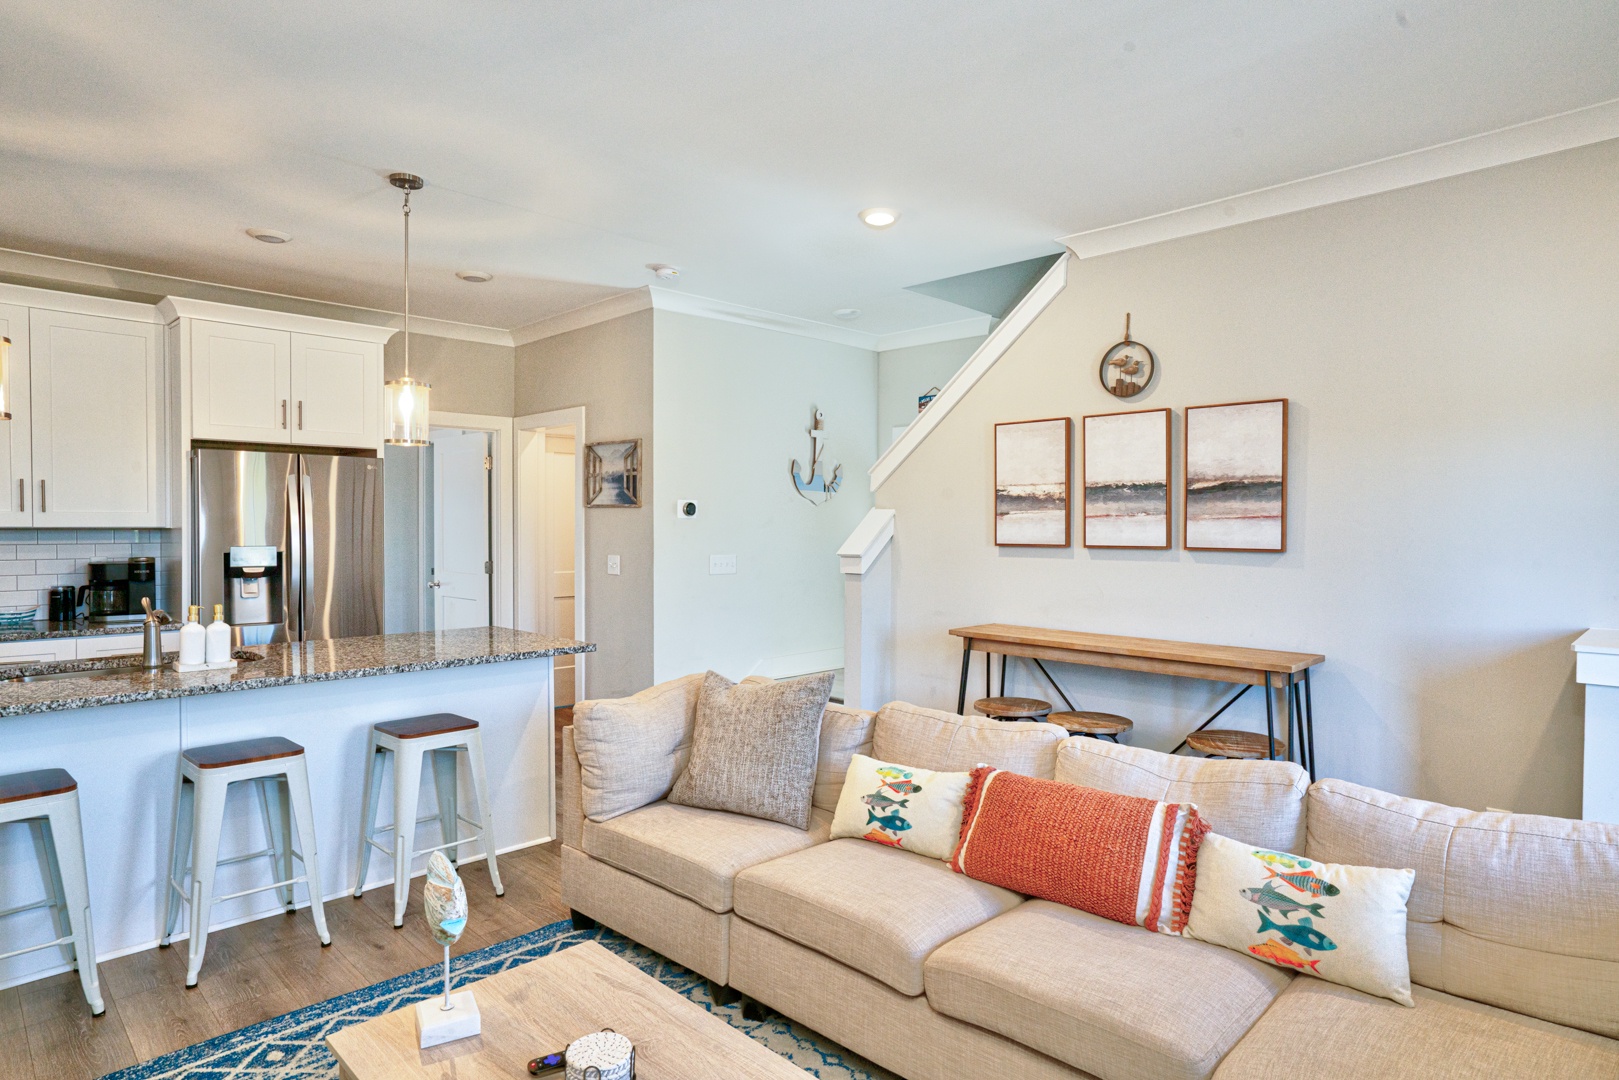 Enjoy the breezy, open layout of the 2nd floor living areas